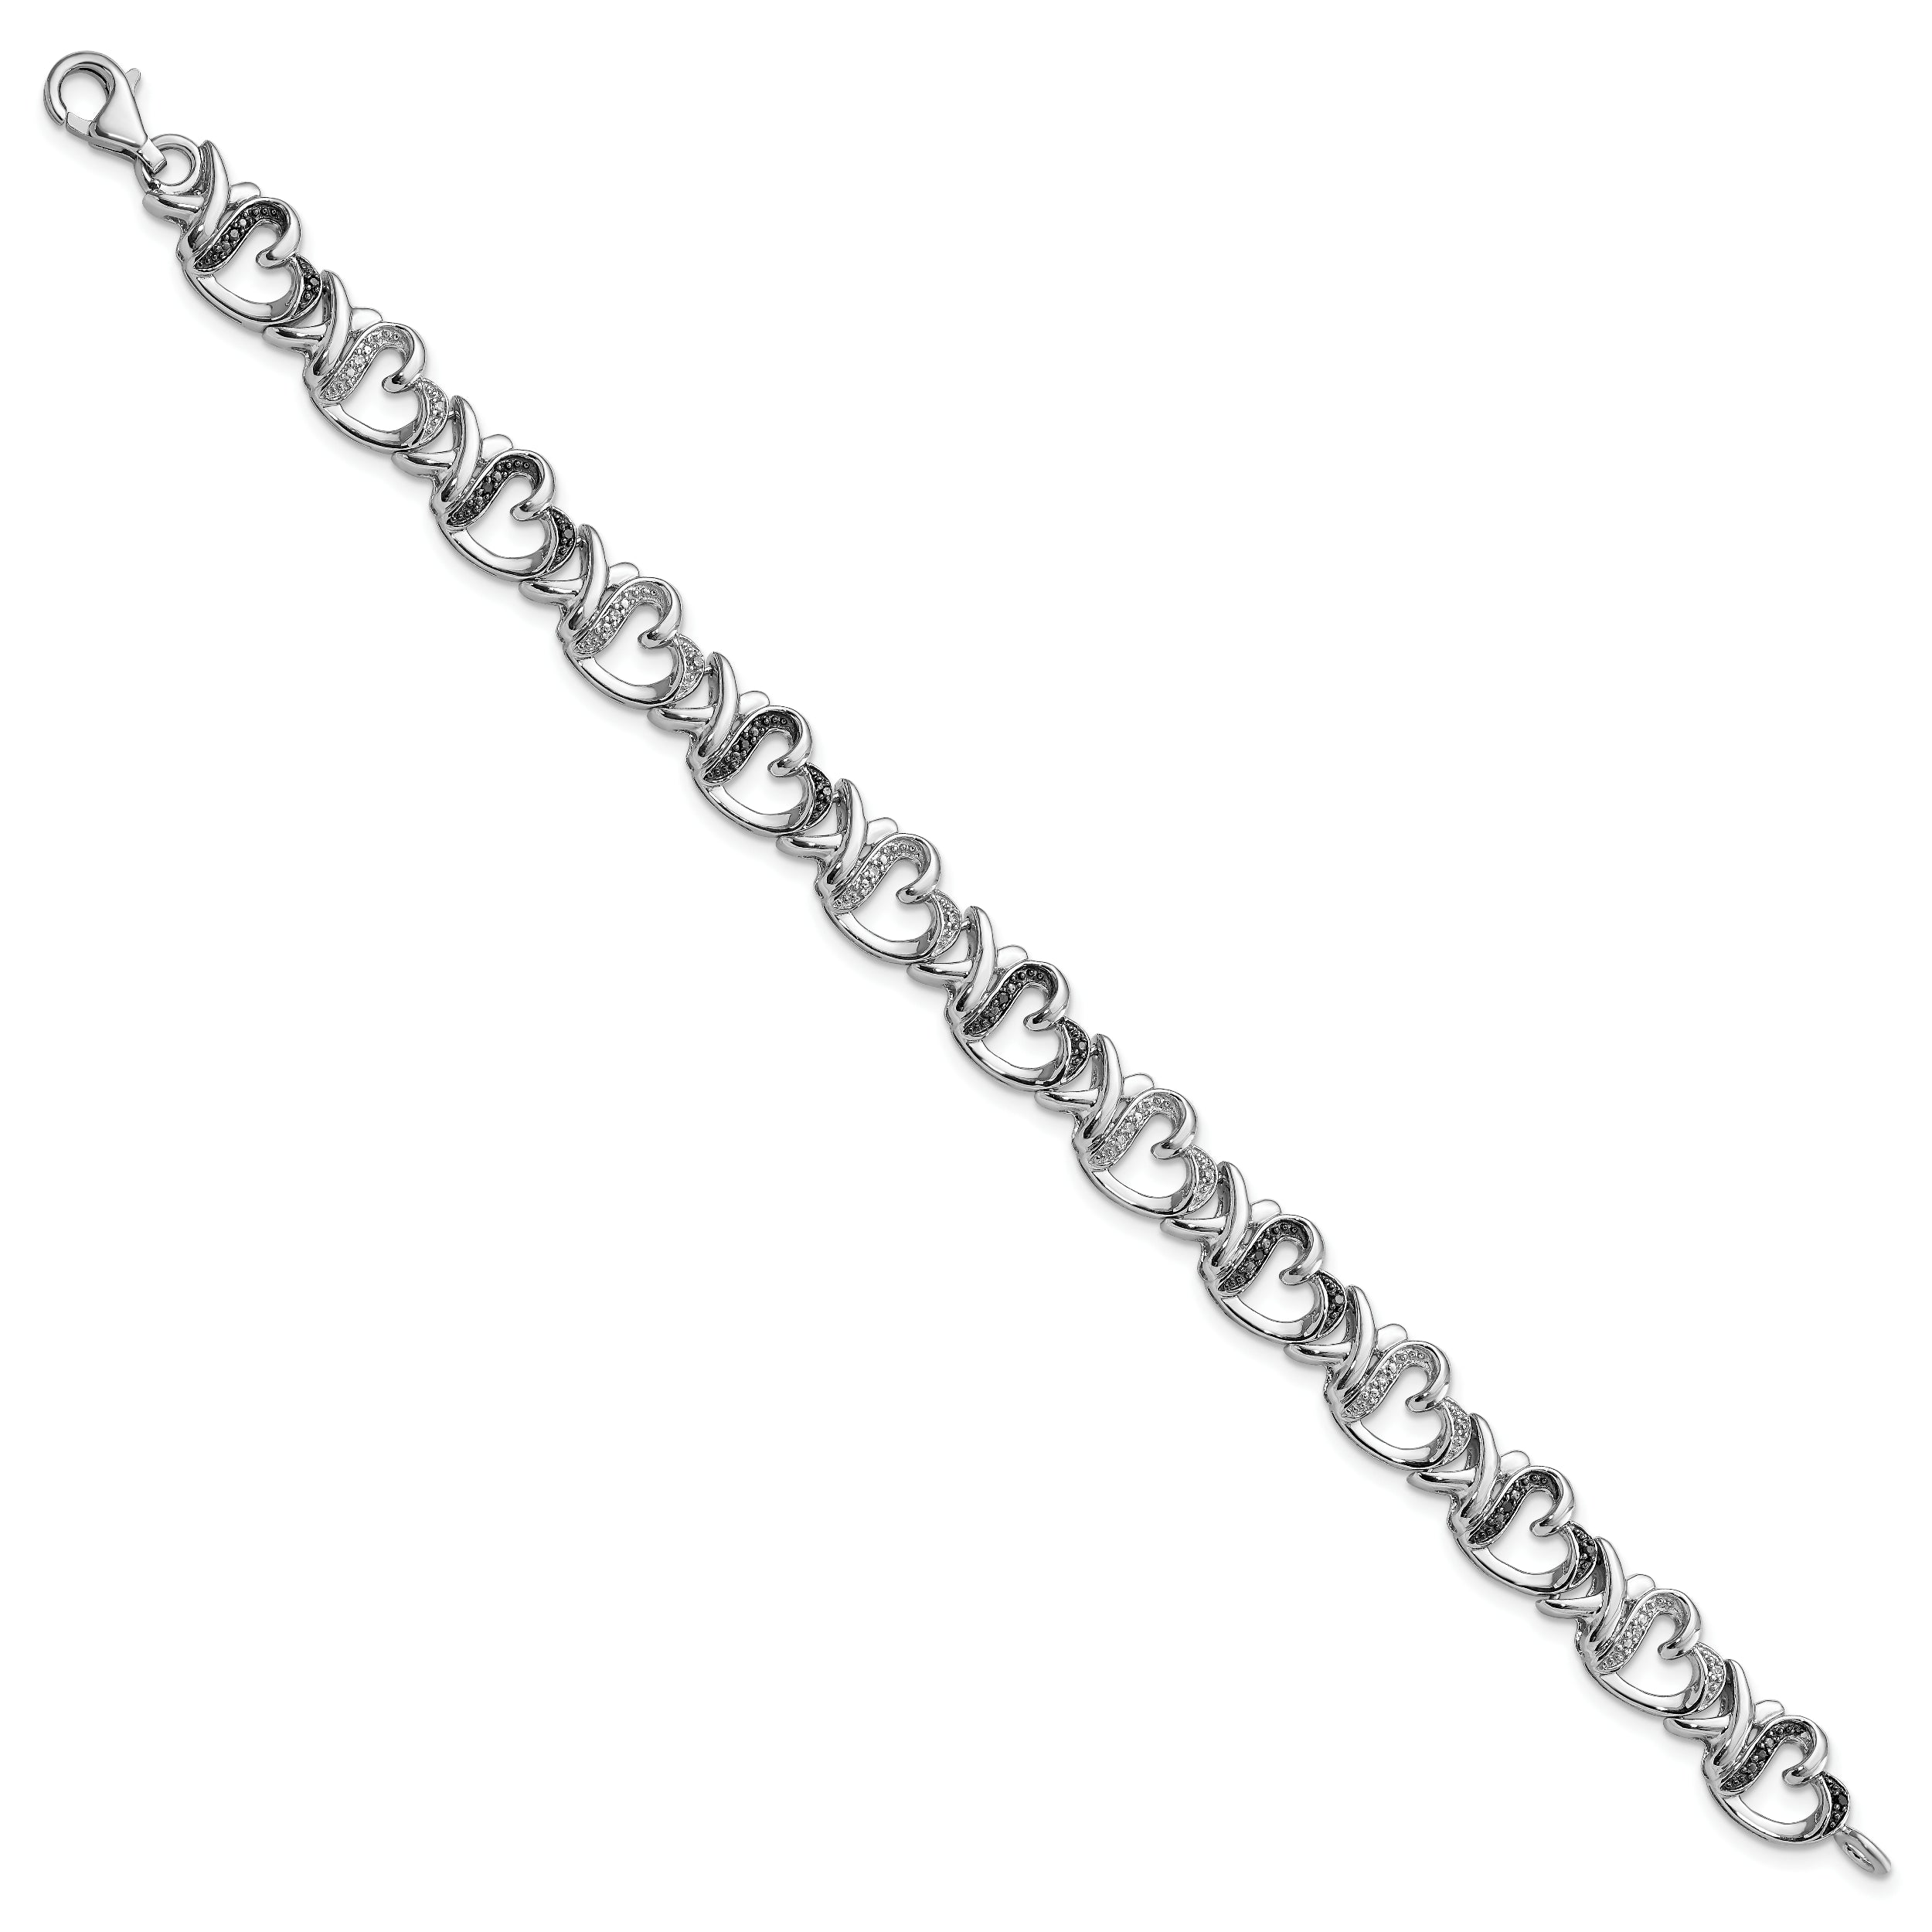 White Night Sterling Silver Rhodium-plated Black and White Diamond Heart 7.5 Inch Bracelet